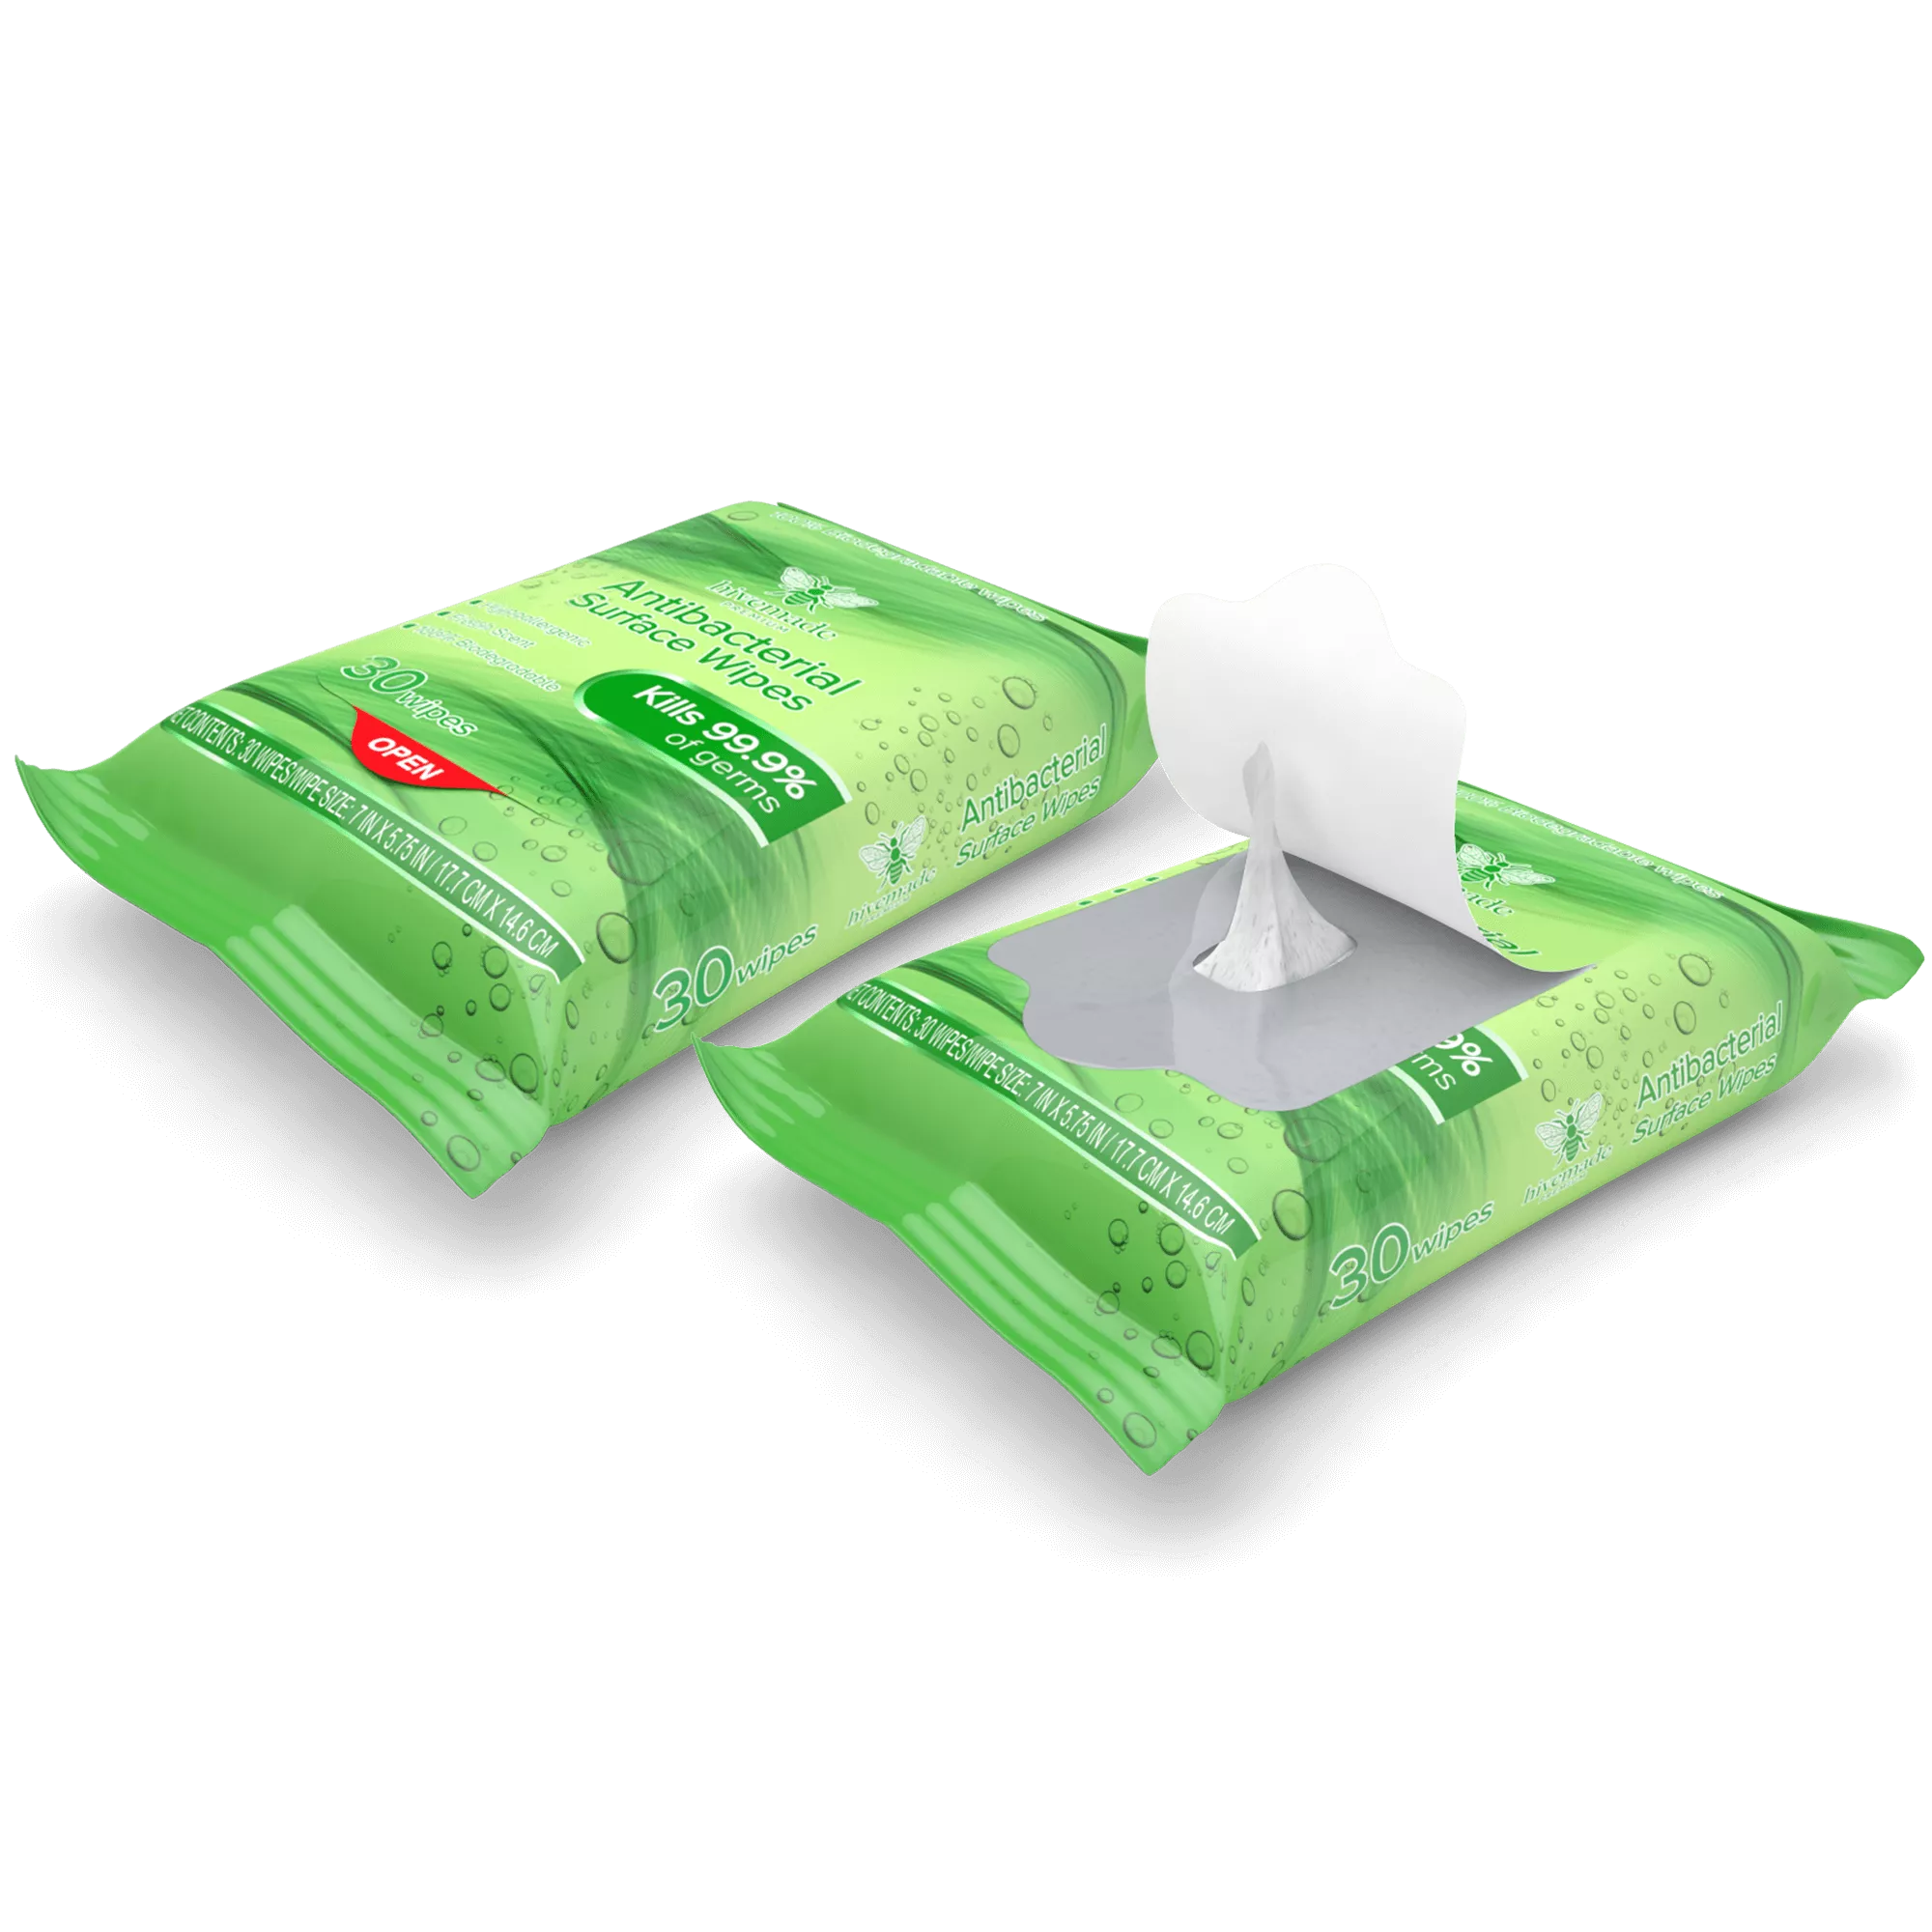 Resealable wipes packaging